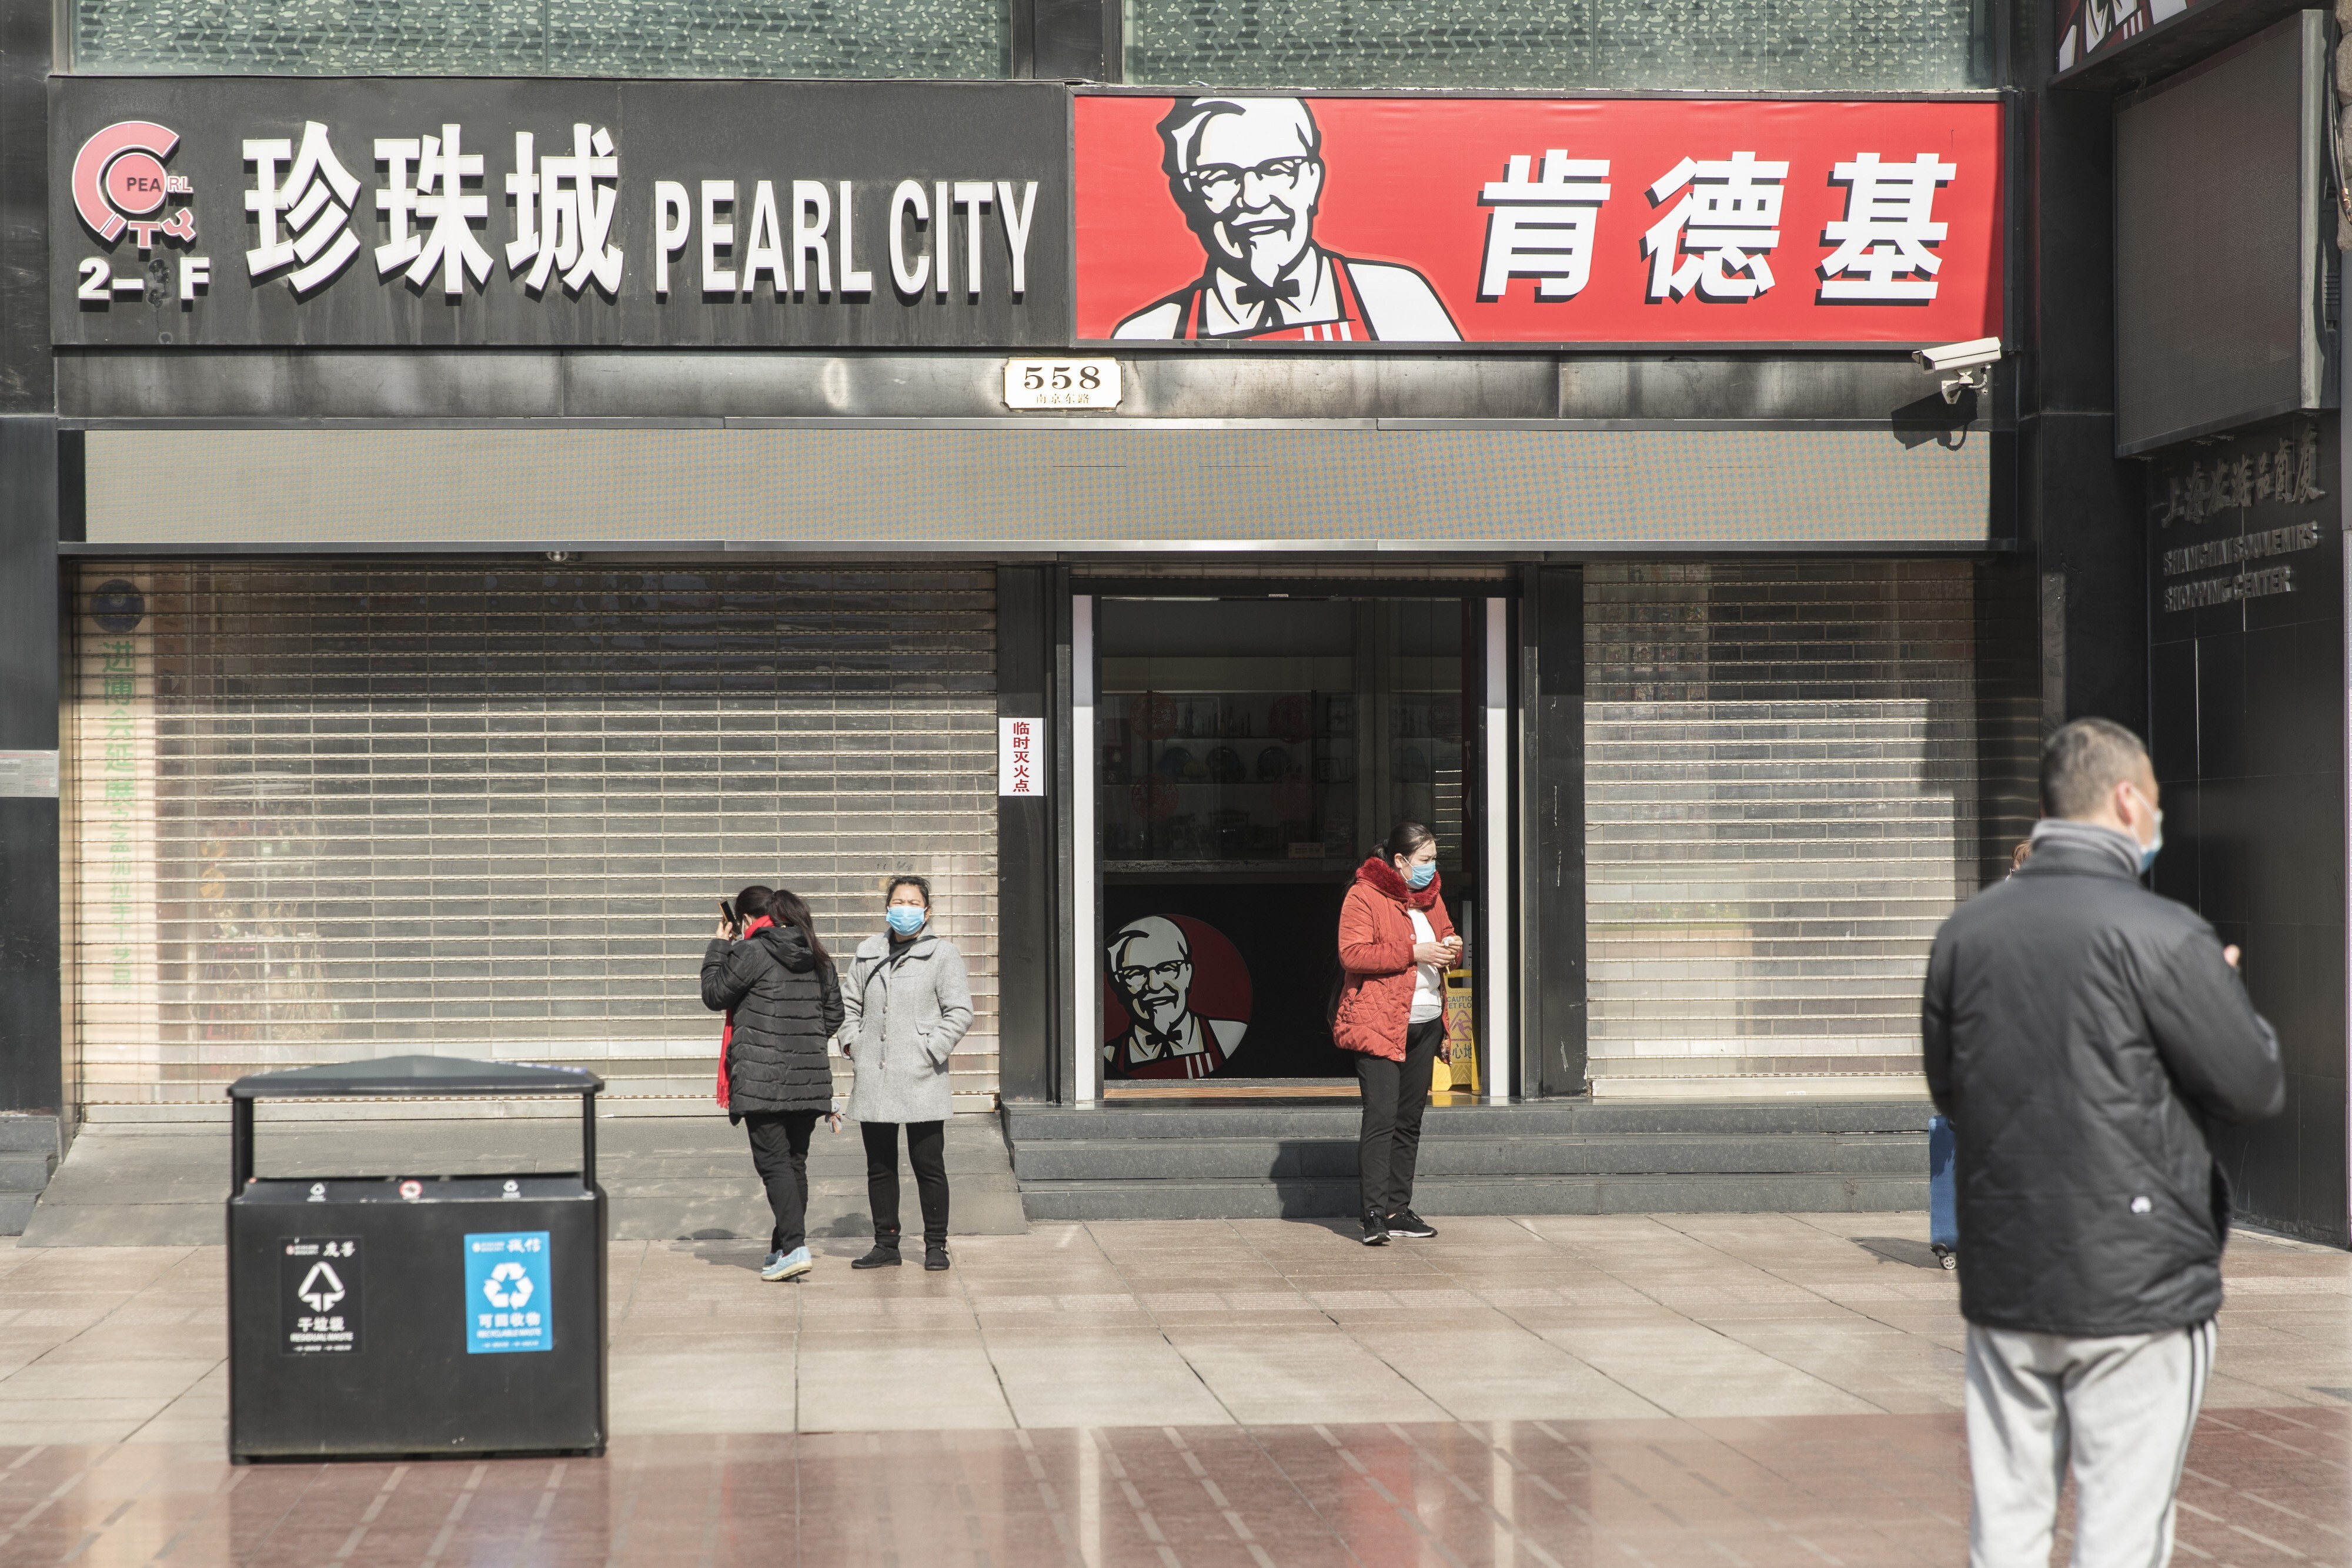 Pedestrians wearing protective masks stand in front of KFC restaurant on Nanjing Road in Shanghai, China, on February 5. Photo: Bloomberg